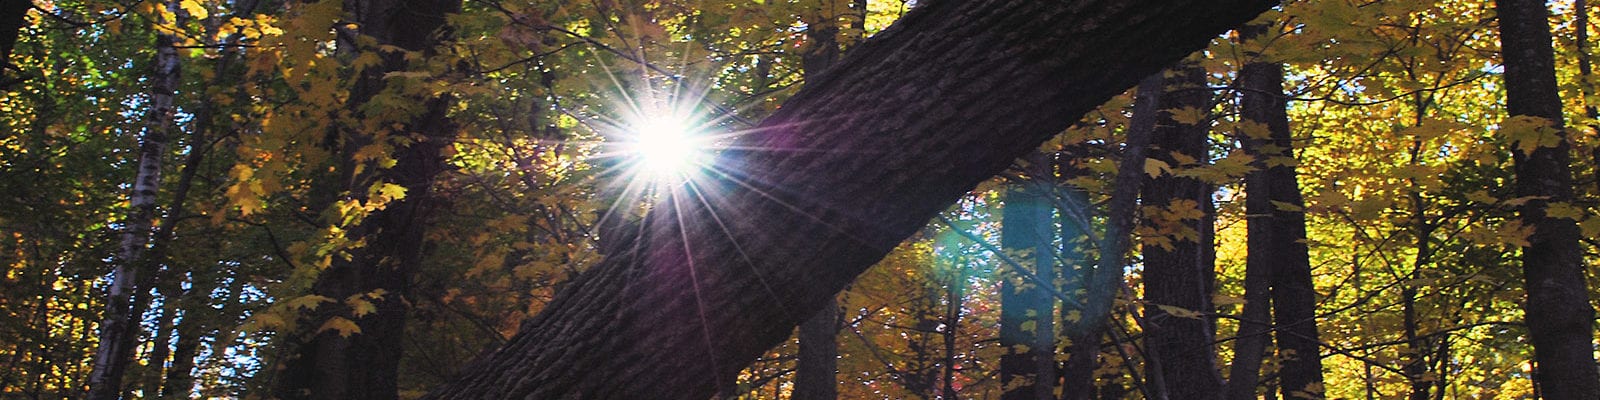 The sun shines through a New England forest, pictured here piercing the foliage just above the trunk of a fallen tree.